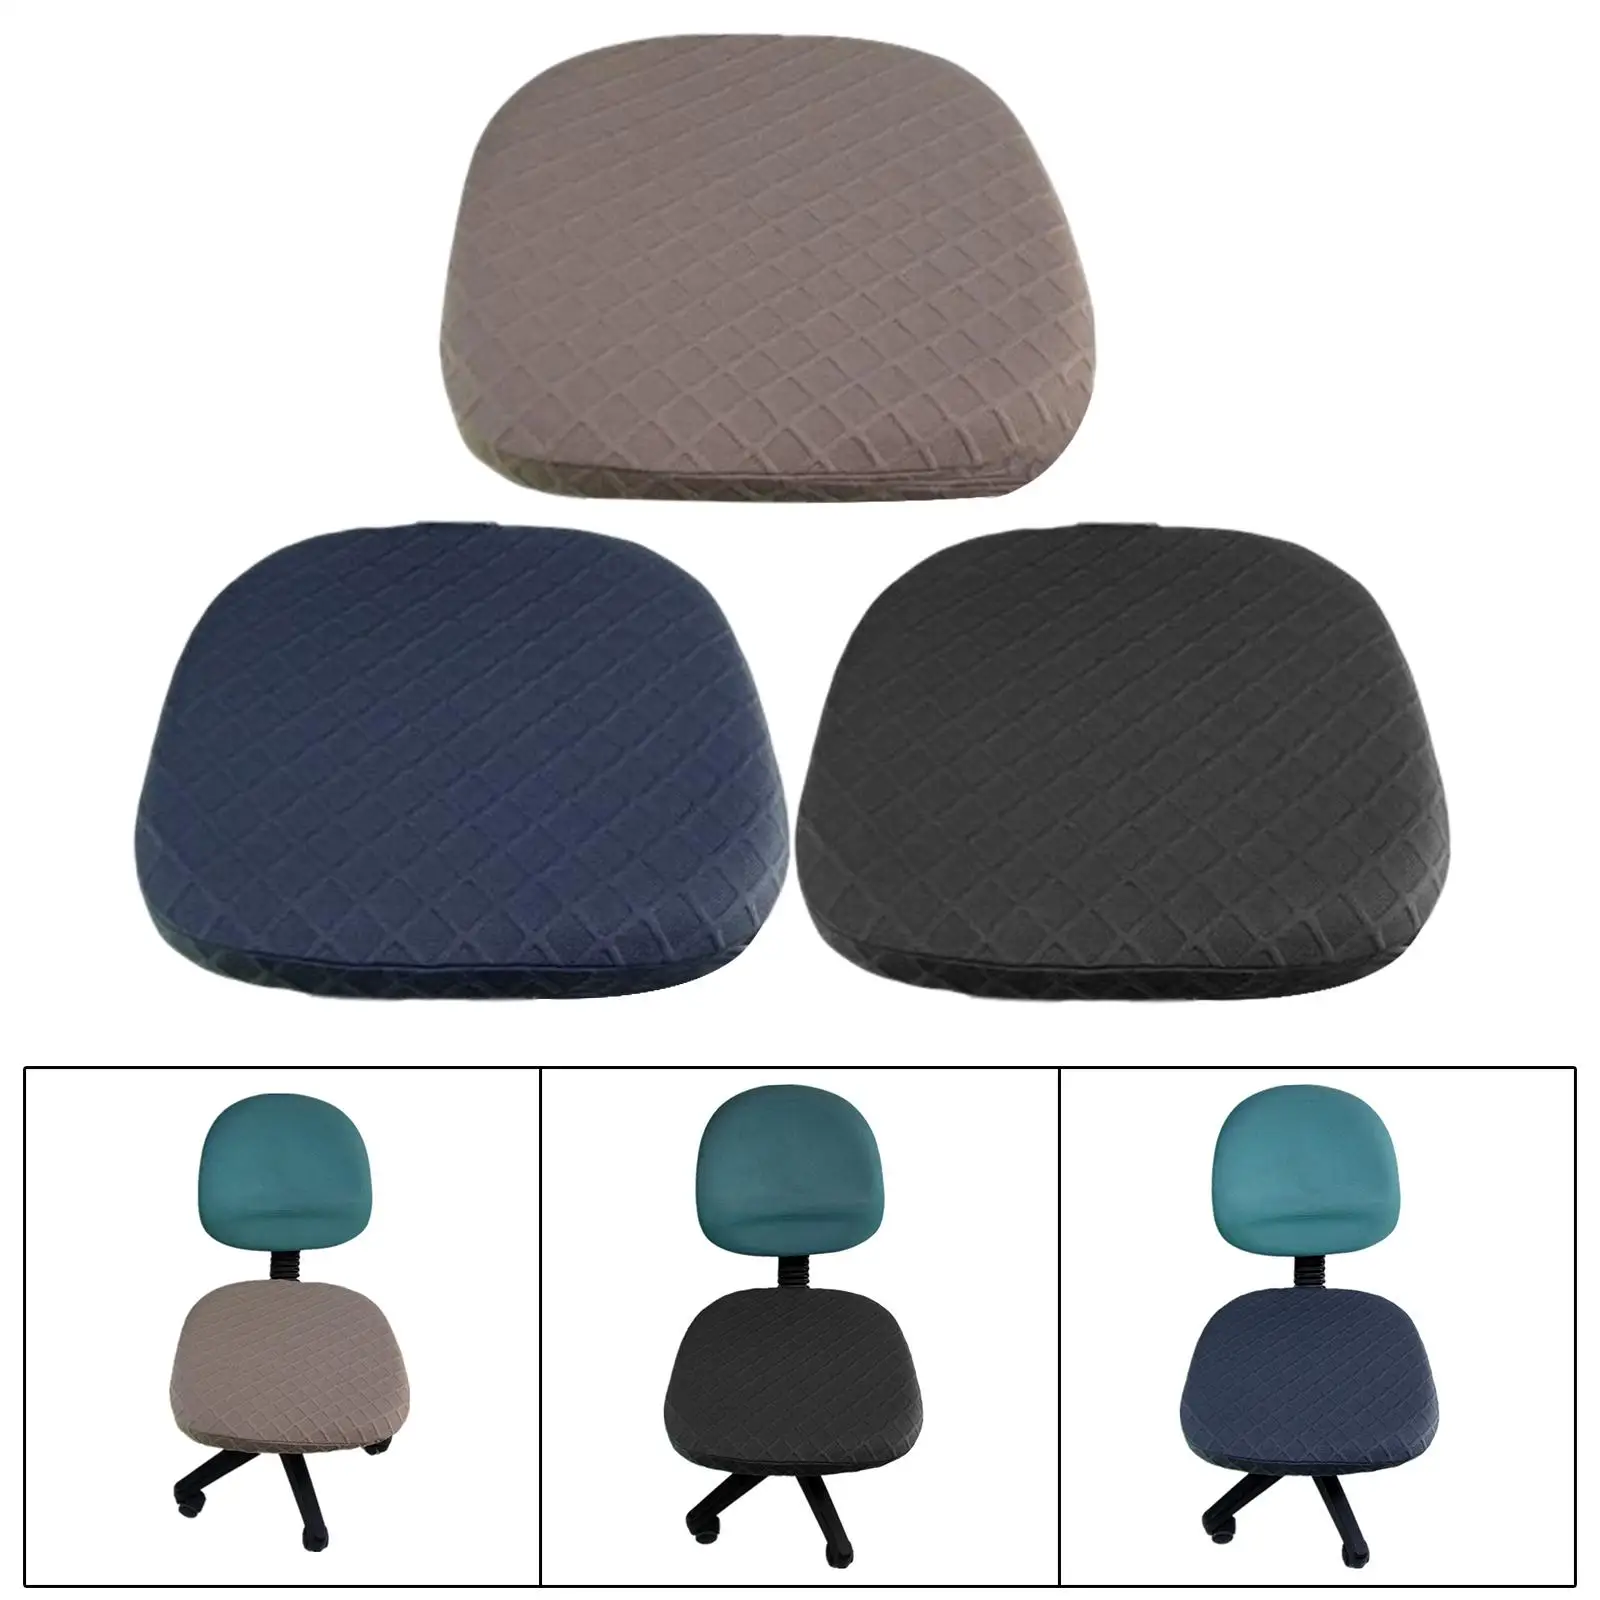 Stretchable Jacquard Office Computer Chair Cushion Seat Cover Machine Wash for Square or Round Seat Cushions Solid Pattern